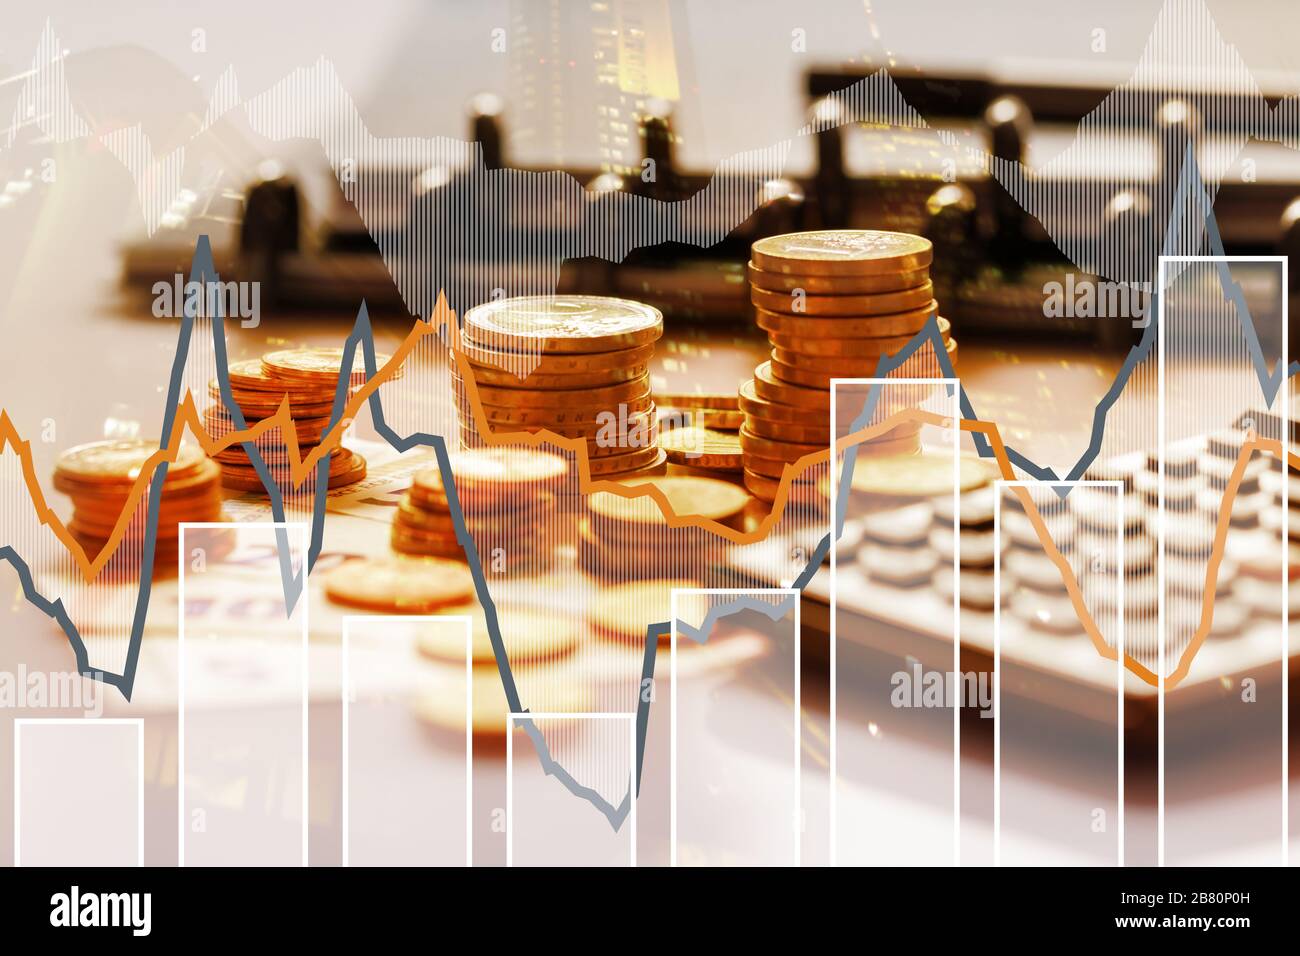 Euro coins in pile on Euro banknotes with calculator and charts, for background. Germany Stock Photo